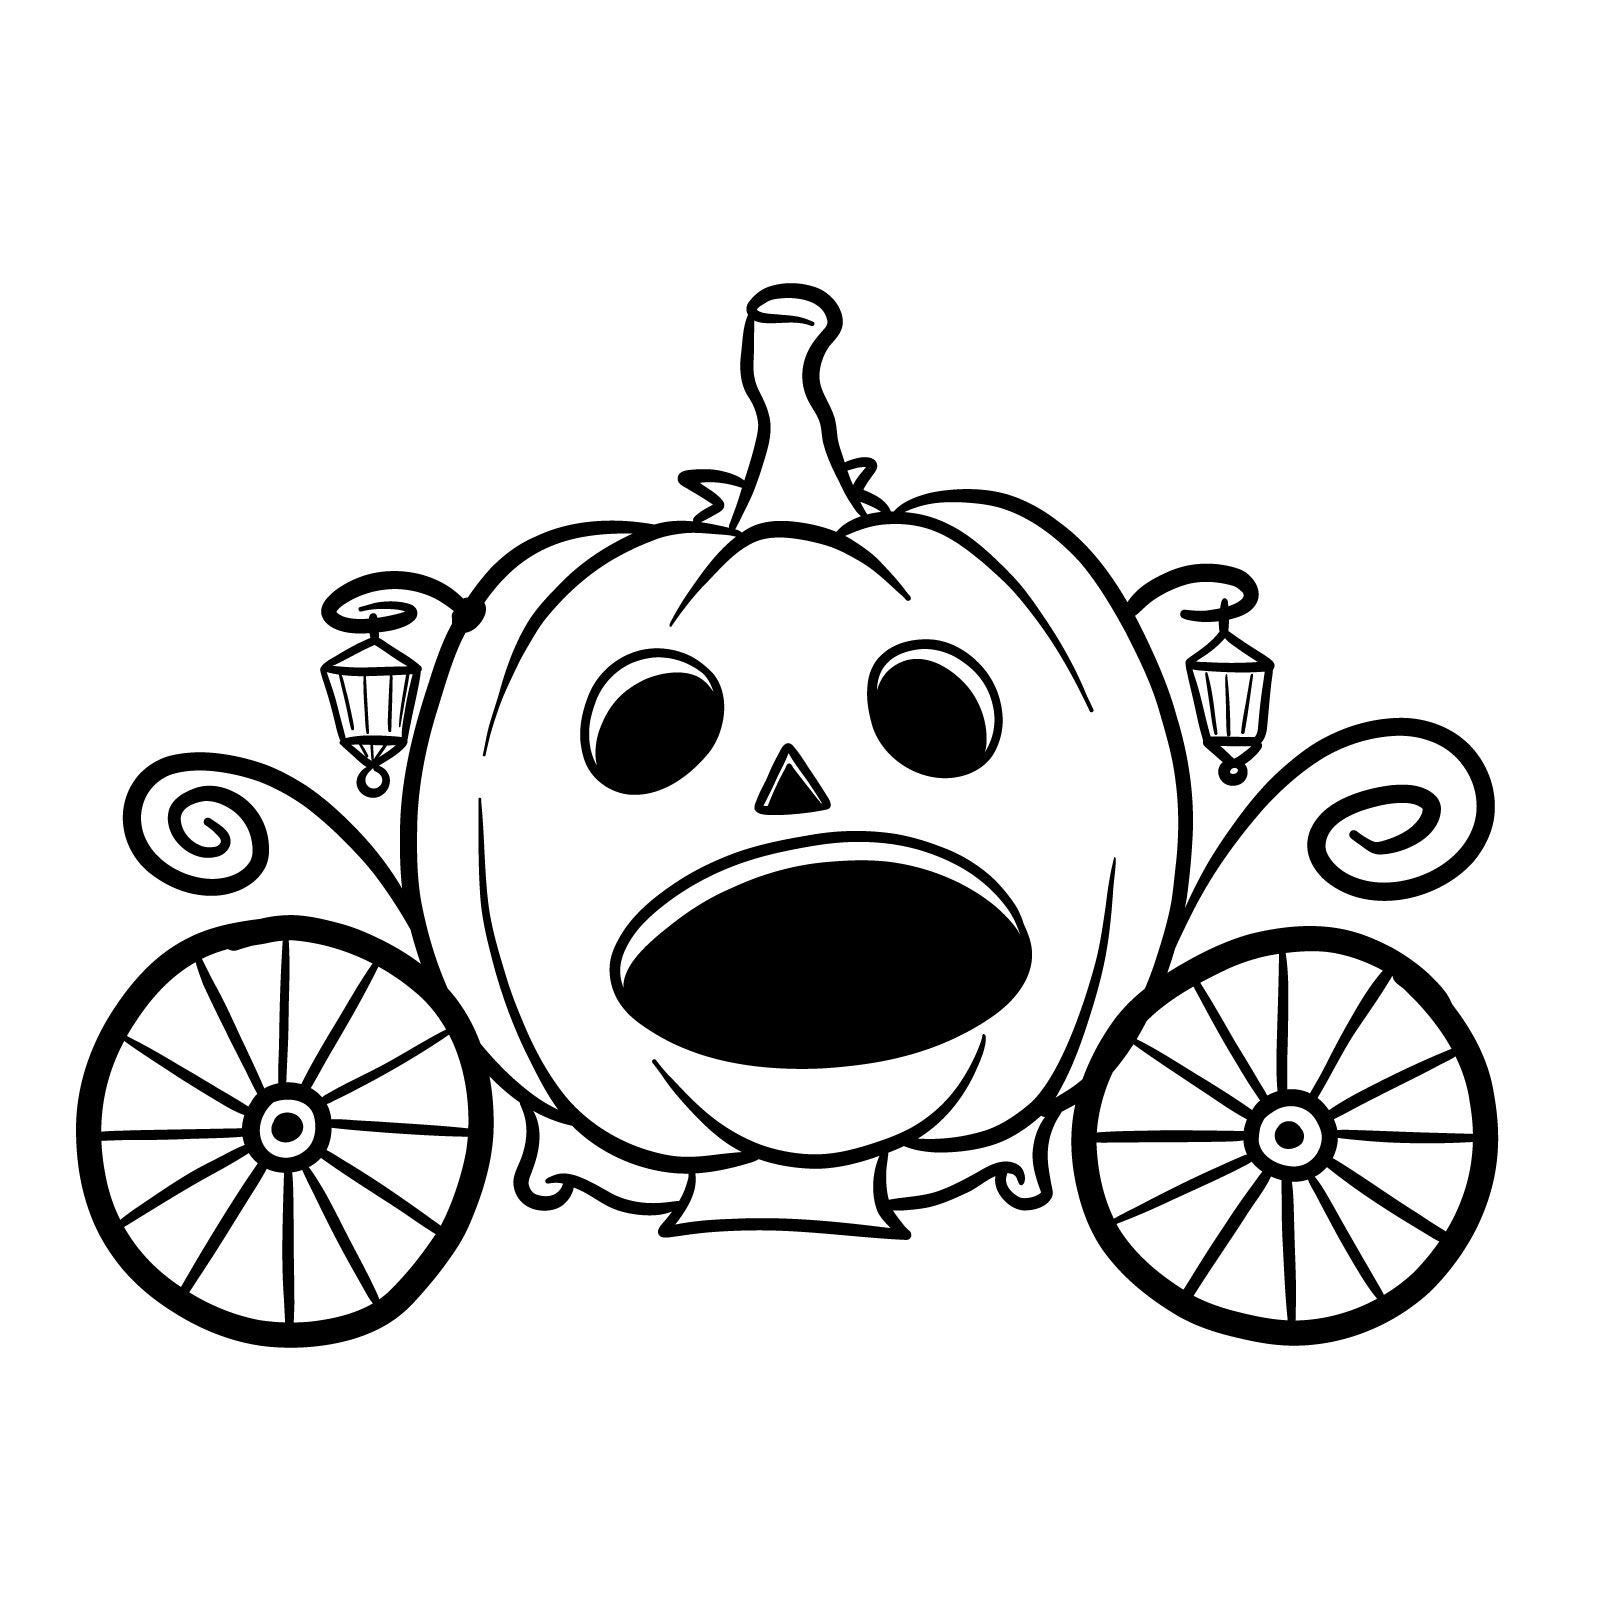 How to draw a Pumpkin Carriage - final step